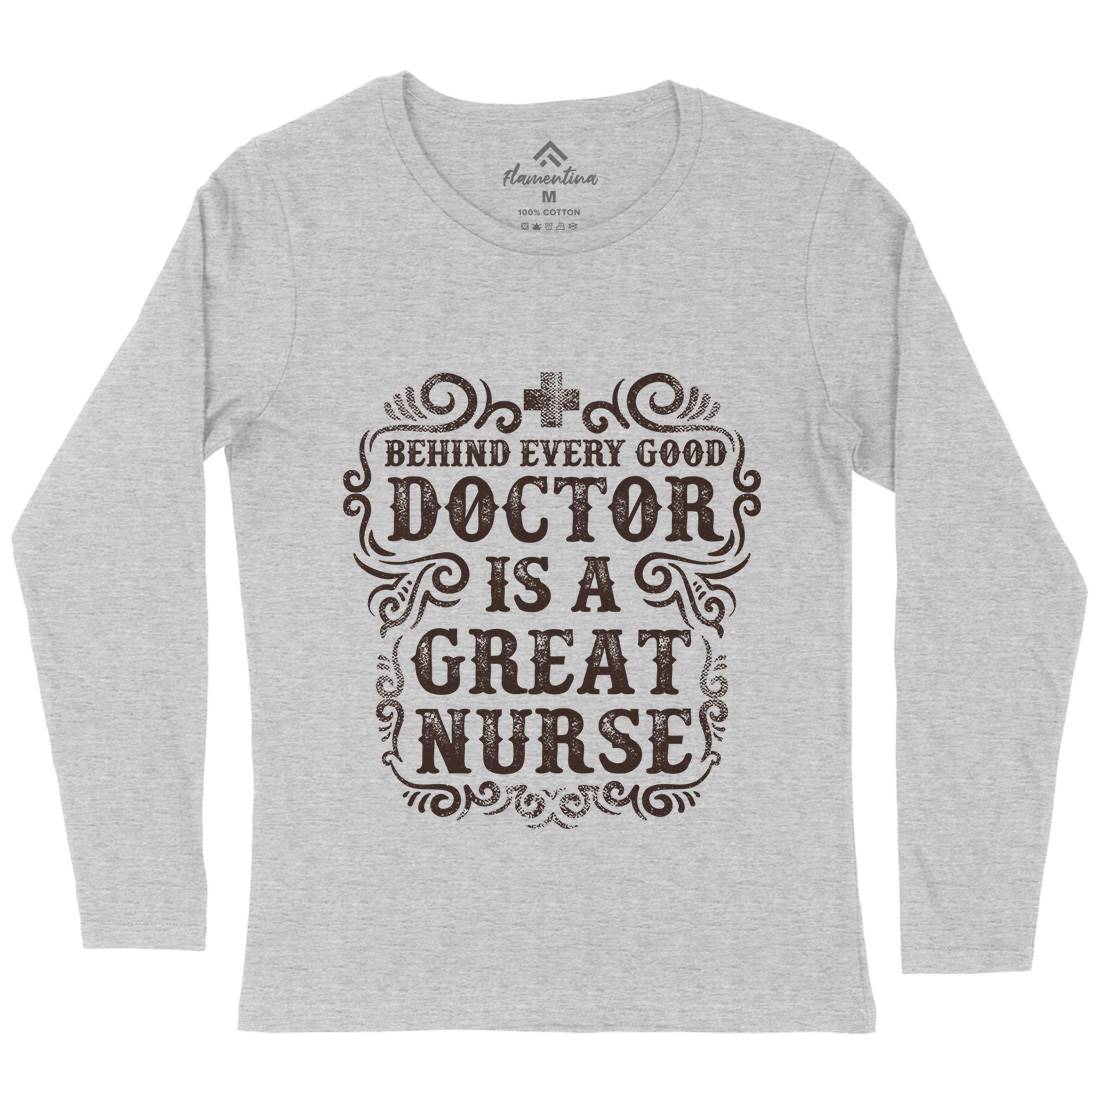 Behind Every Good Doctor Is A Great Nurse Womens Long Sleeve T-Shirt Work C910